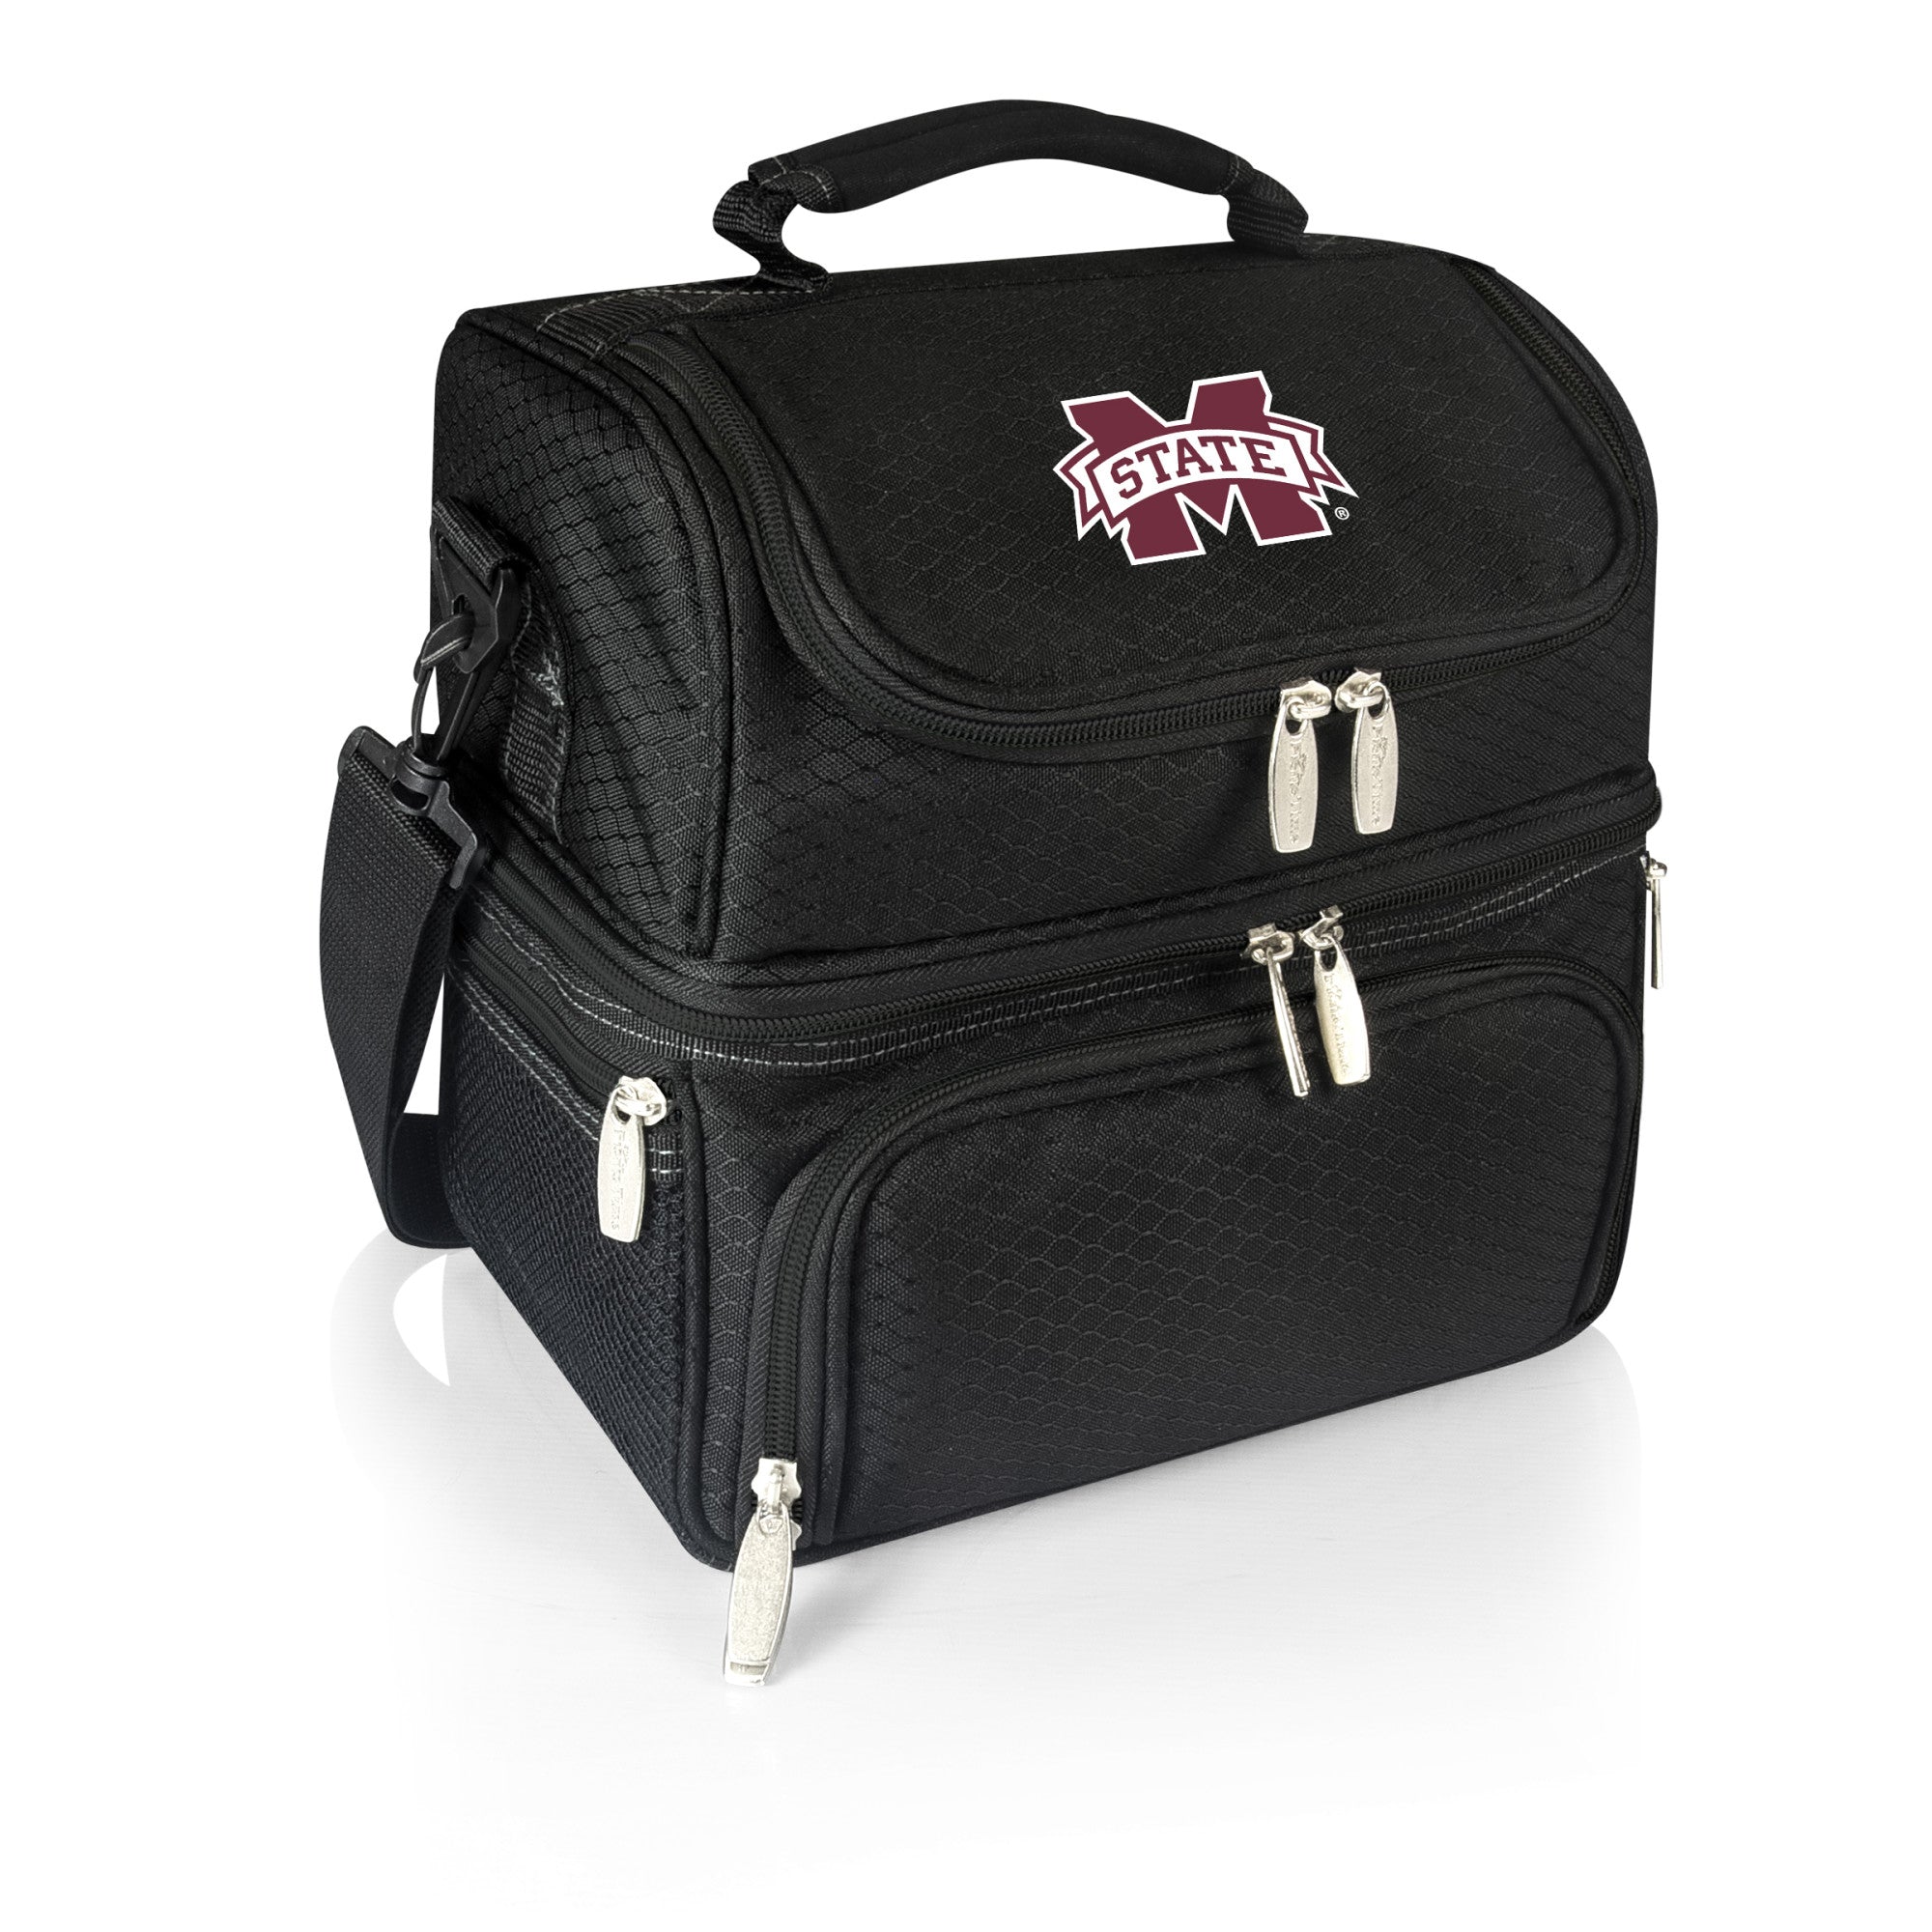 Mississippi State Bulldogs - Pranzo Lunch Bag Cooler with Utensils